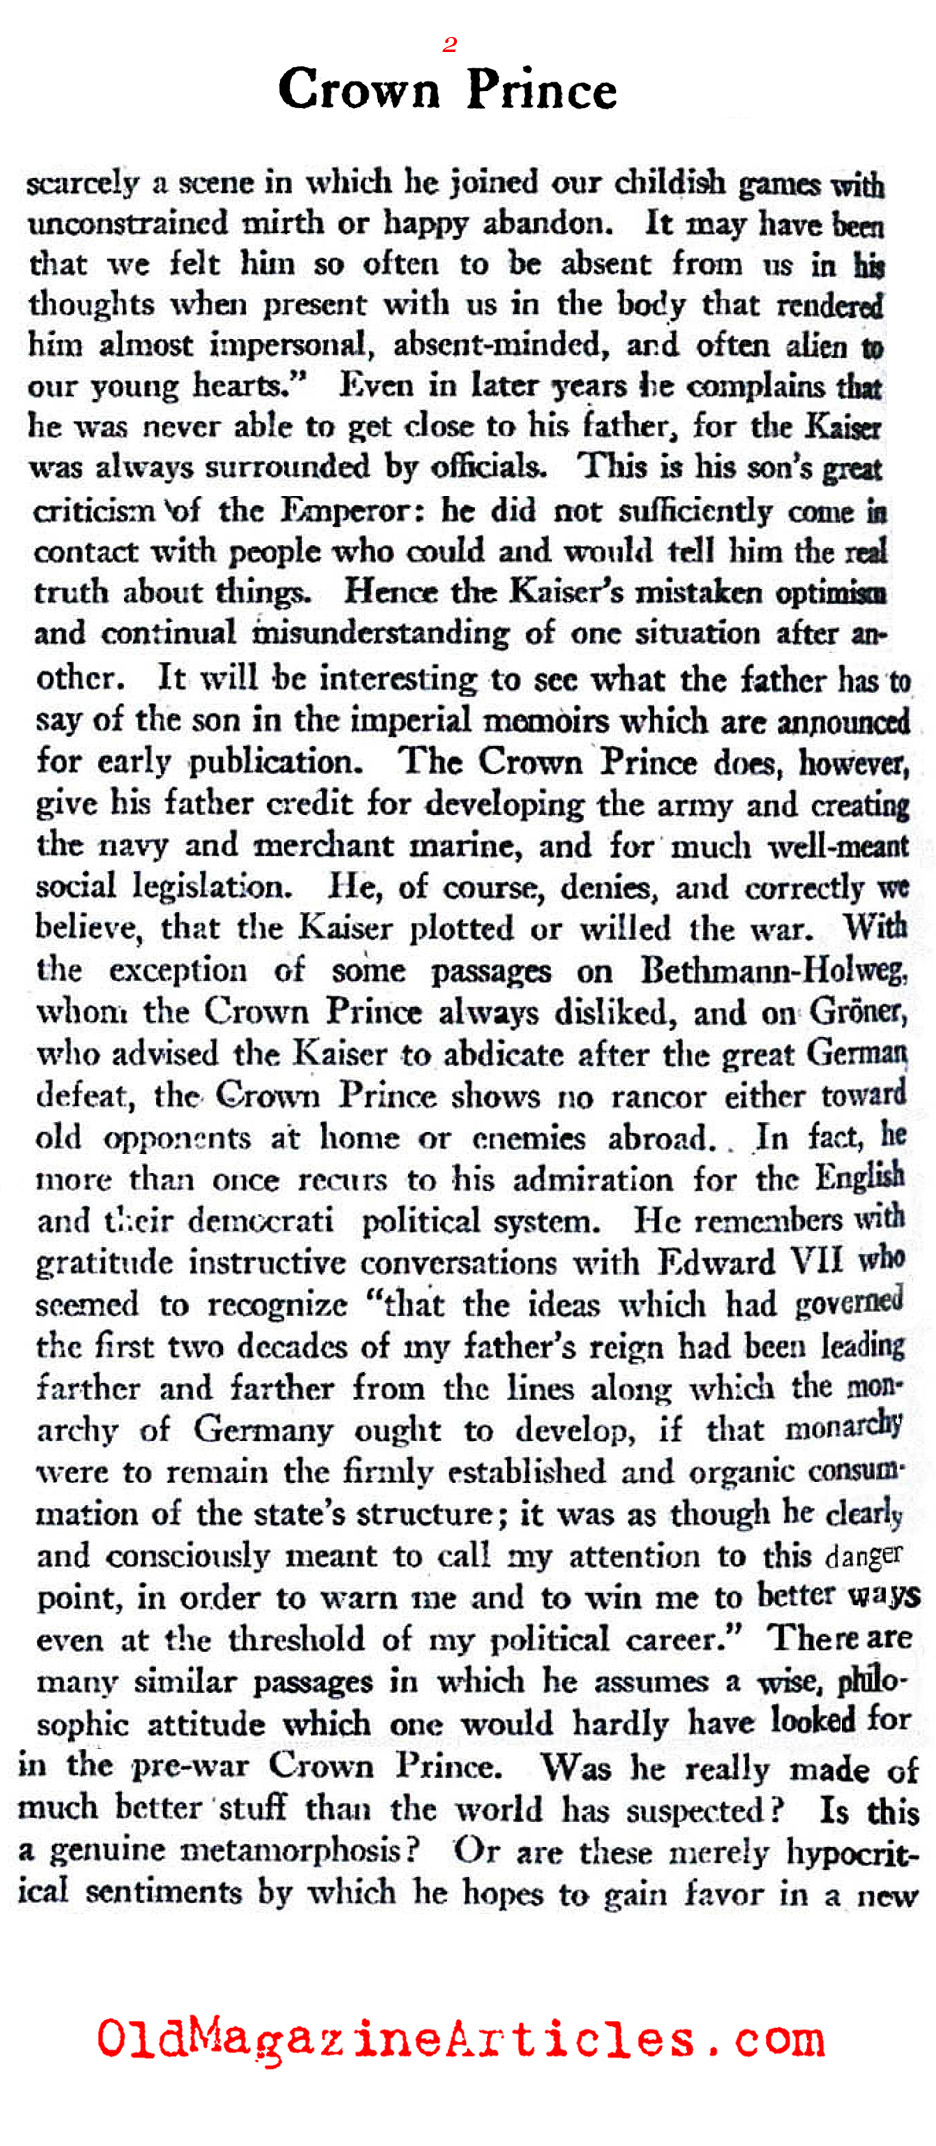 A Review of the Memoir by the Crown Prince (The New Republic, 1922)